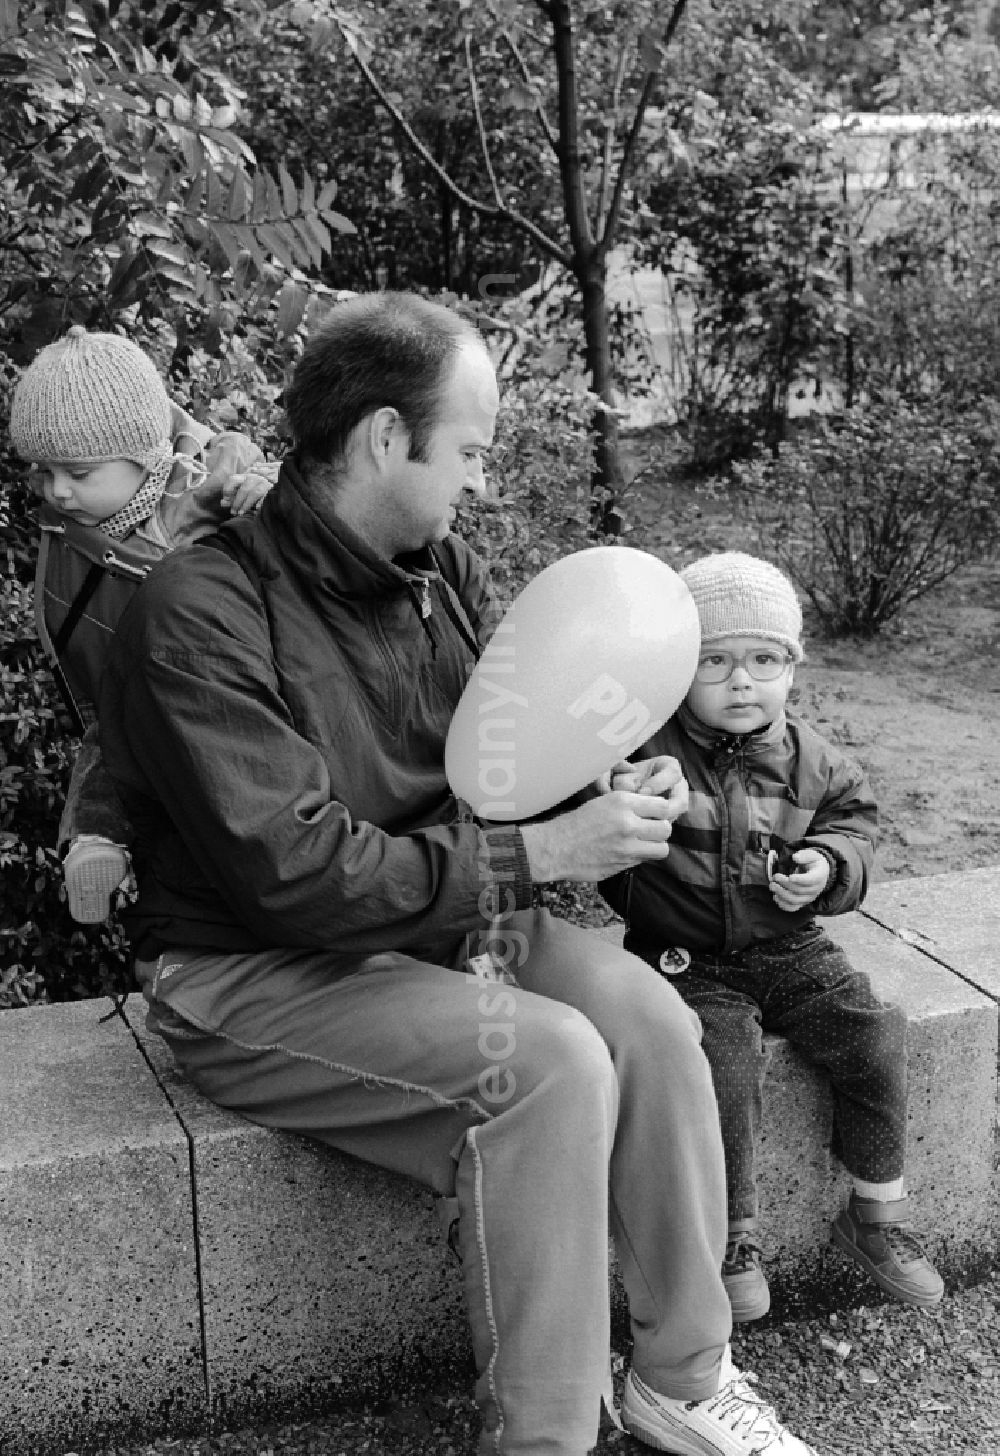 GDR photo archive: Berlin - Father with two children in Berlin, the former capital of the GDR, German Democratic Republic